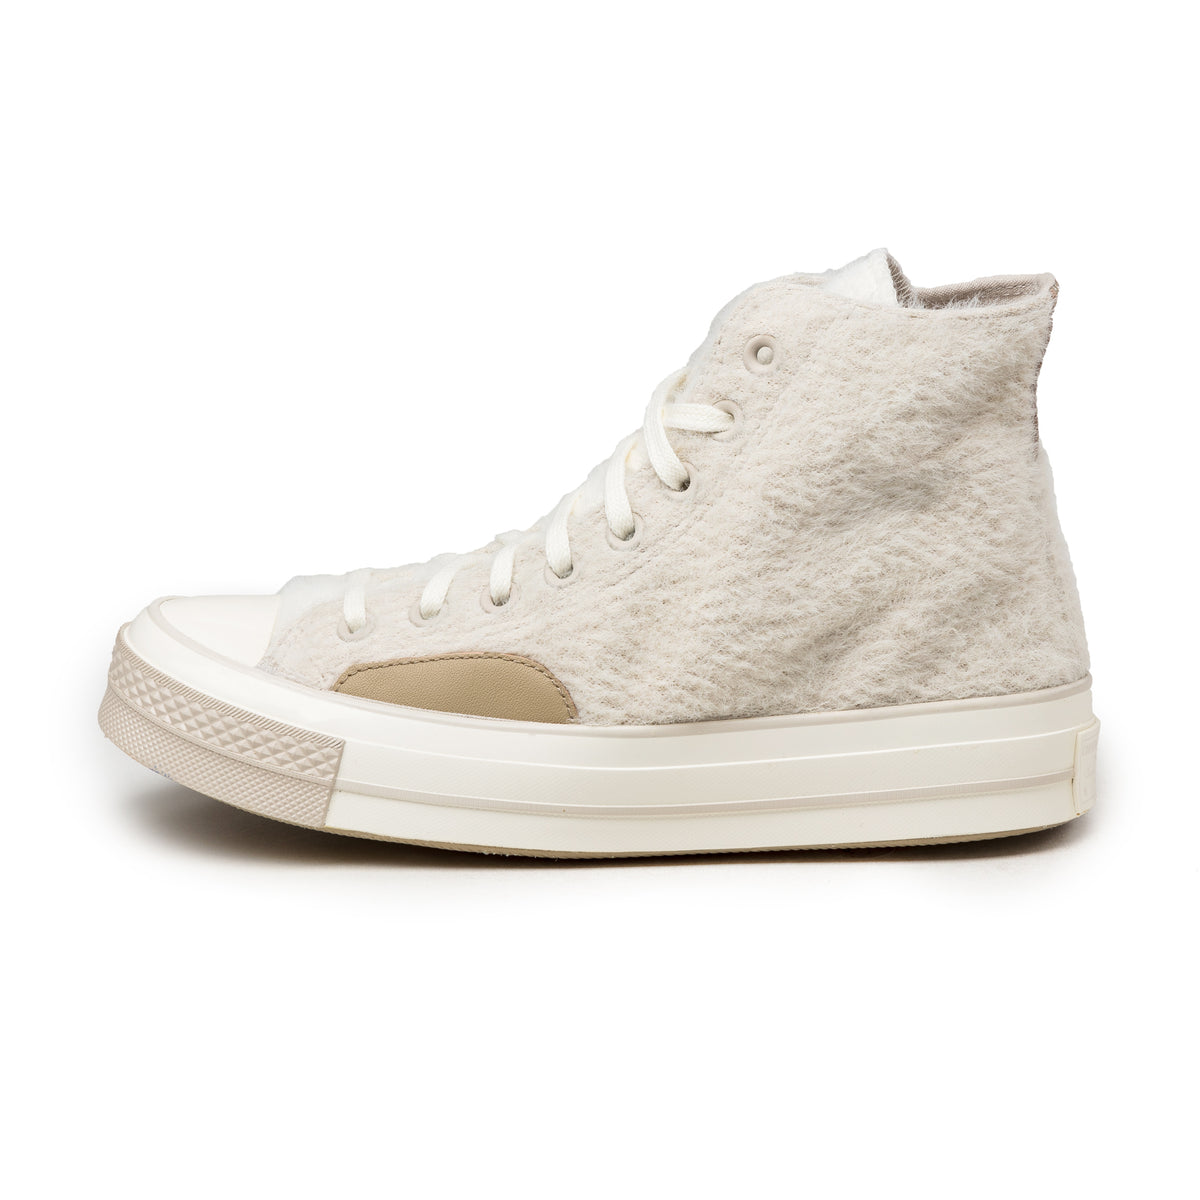 Converse Chuck Taylor All Star '70 Hi *Cozy Knit* » Buy online now!